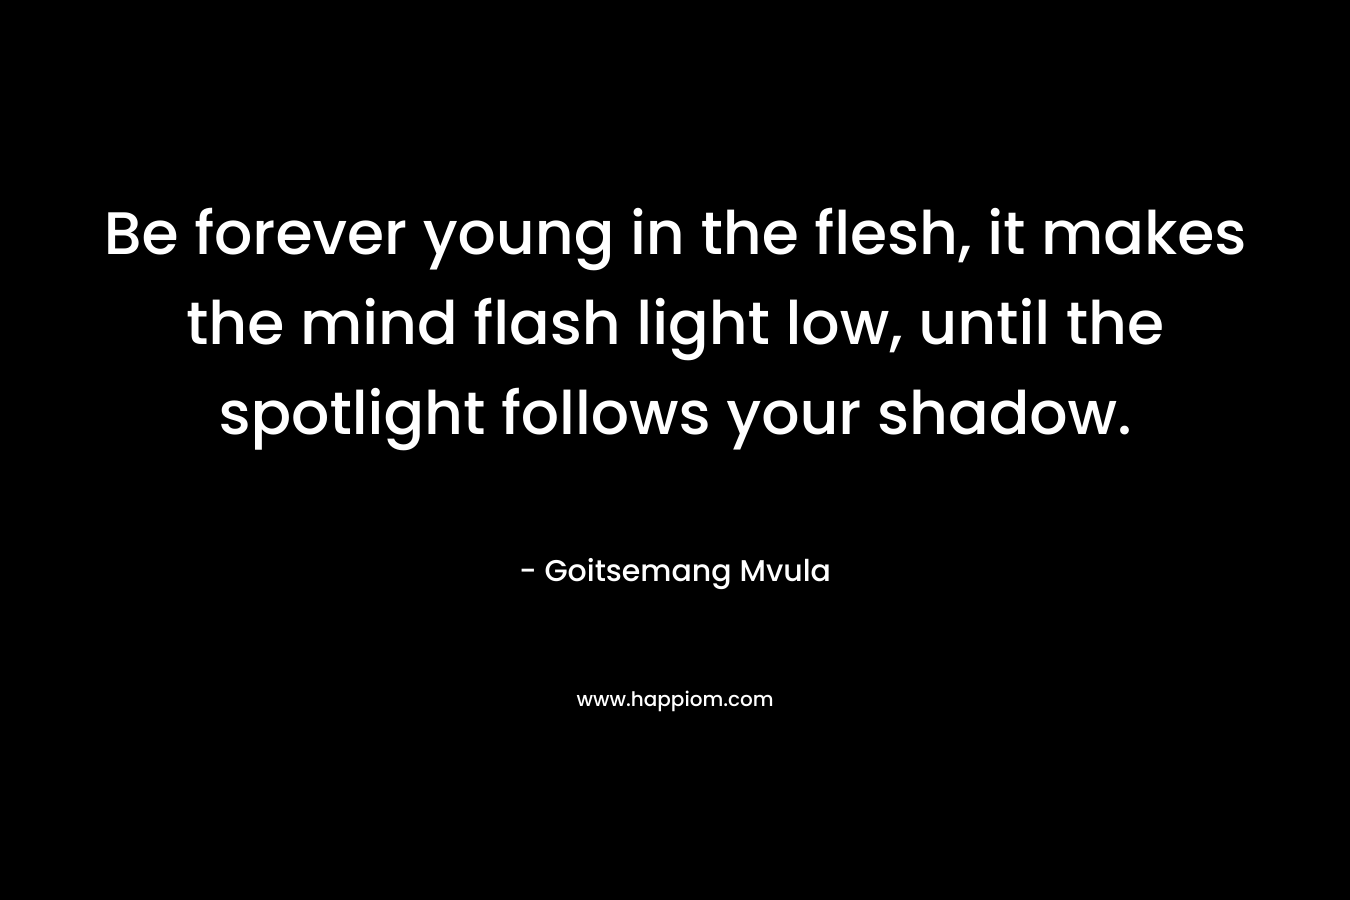 Be forever young in the flesh, it makes the mind flash light low, until the spotlight follows your shadow. – Goitsemang Mvula